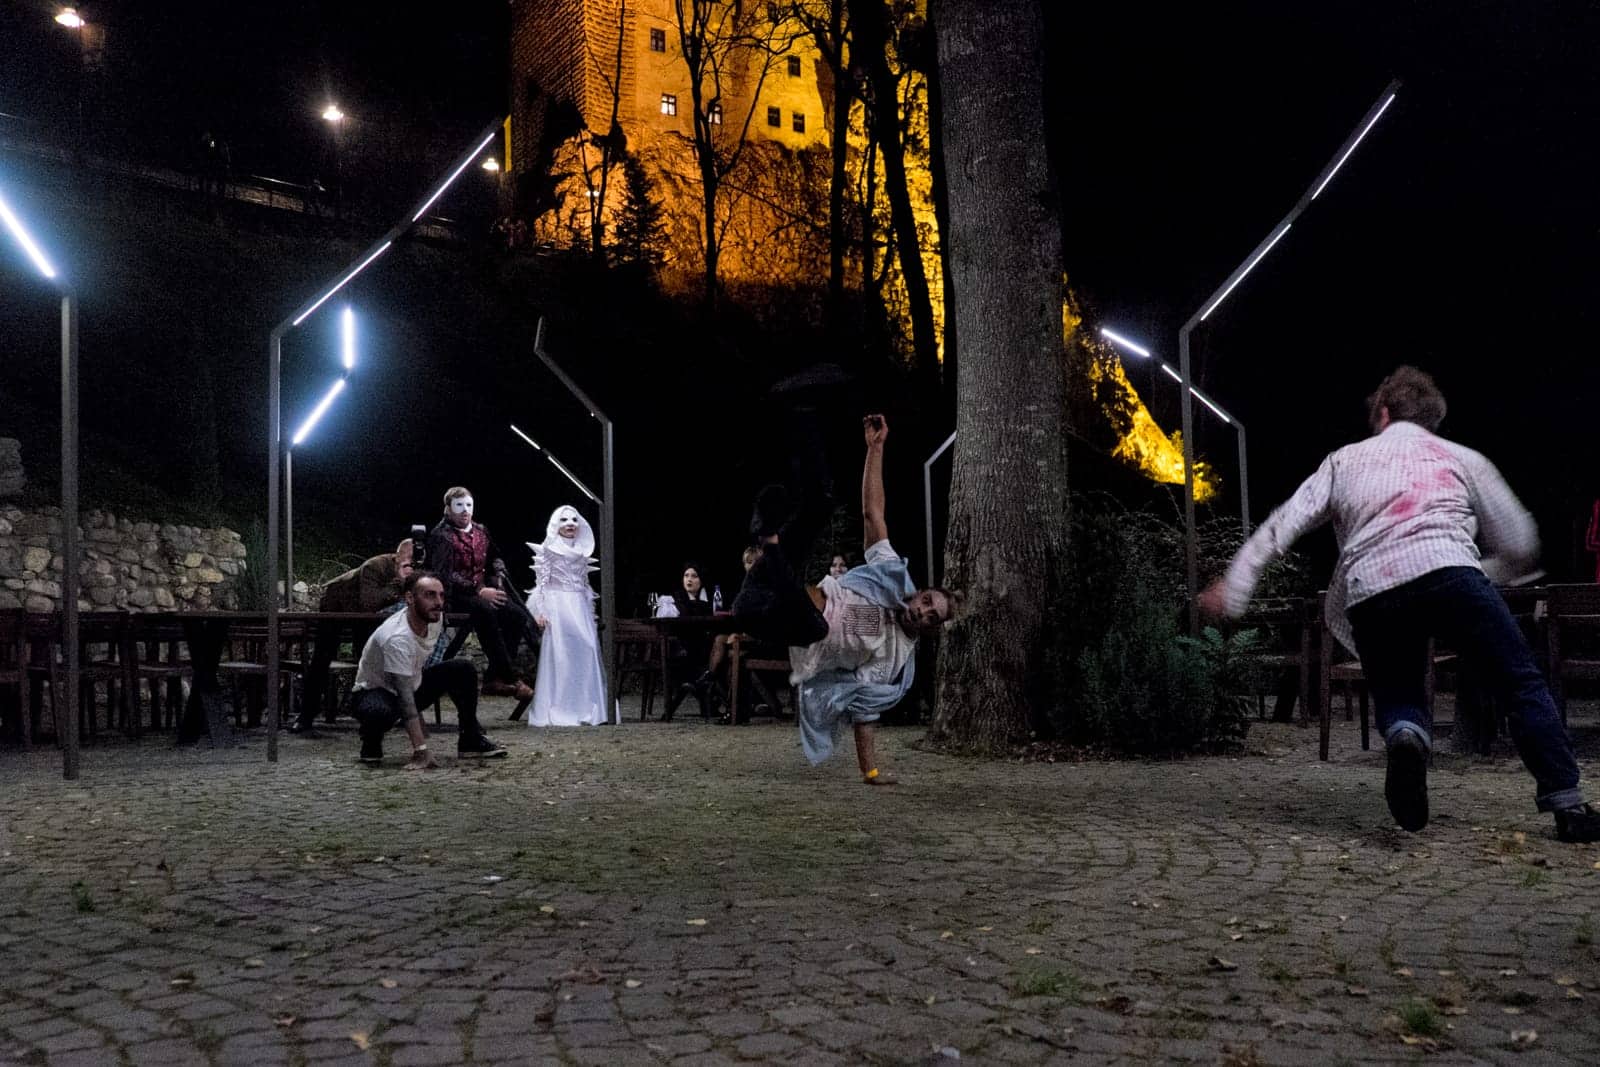 Two breakdancers in costume perform at a Halloween party in the grounds of Bran Castle, Transylvania, Romania